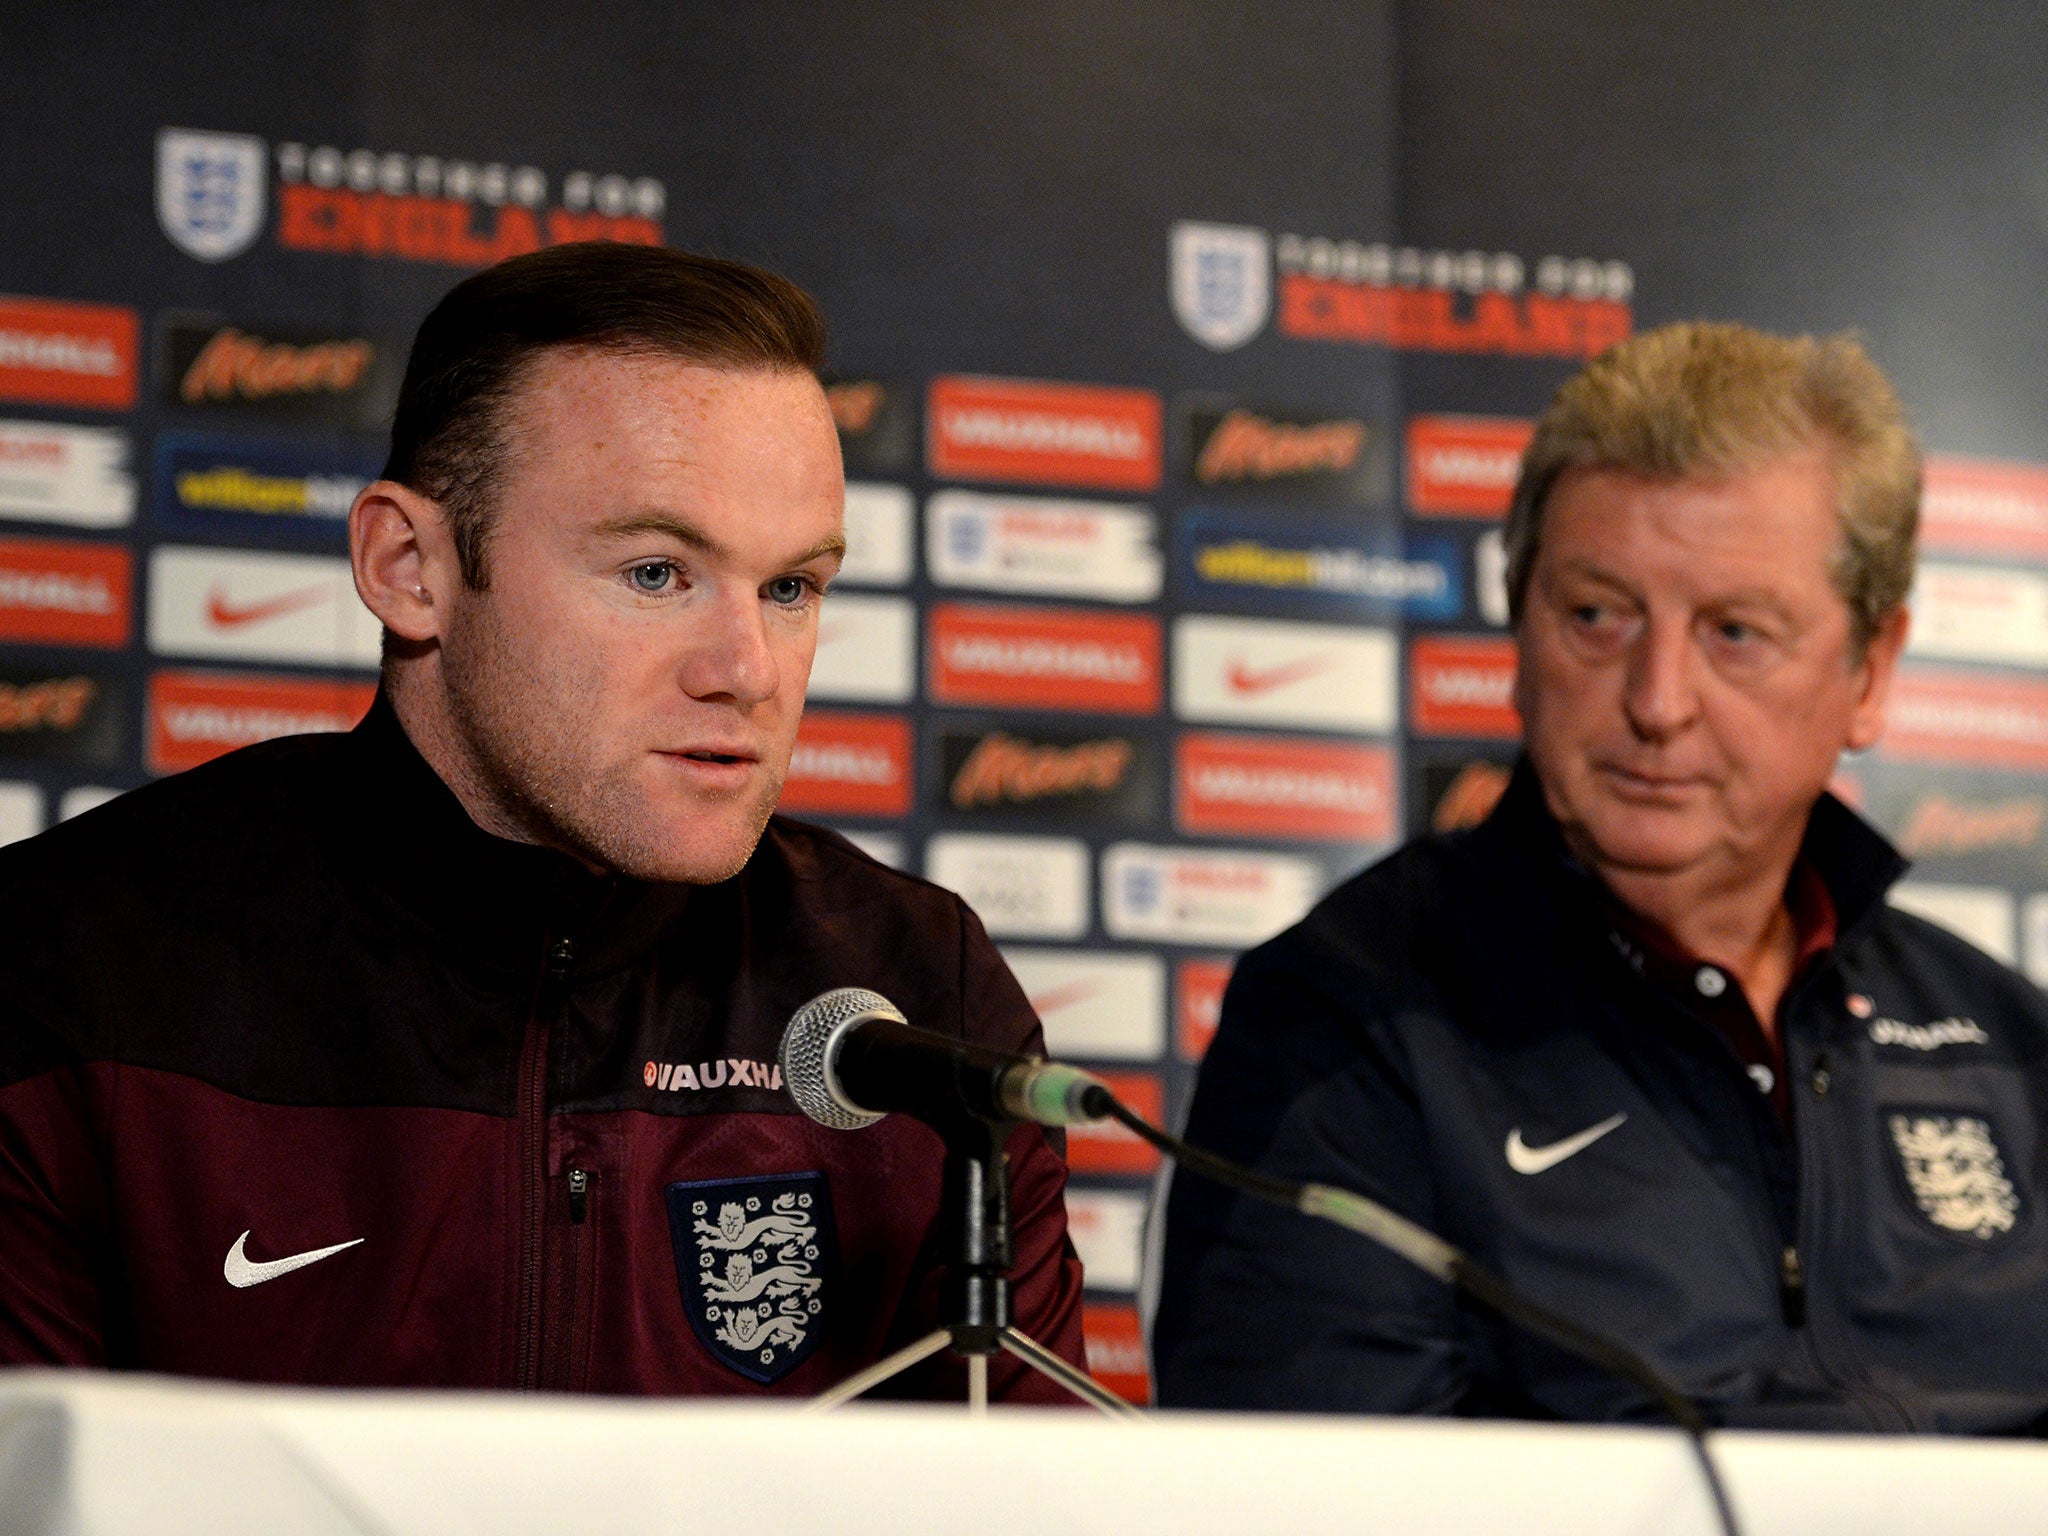 England captain Wayne Rooney speaks to the media as manager Roy Hodgson looks on